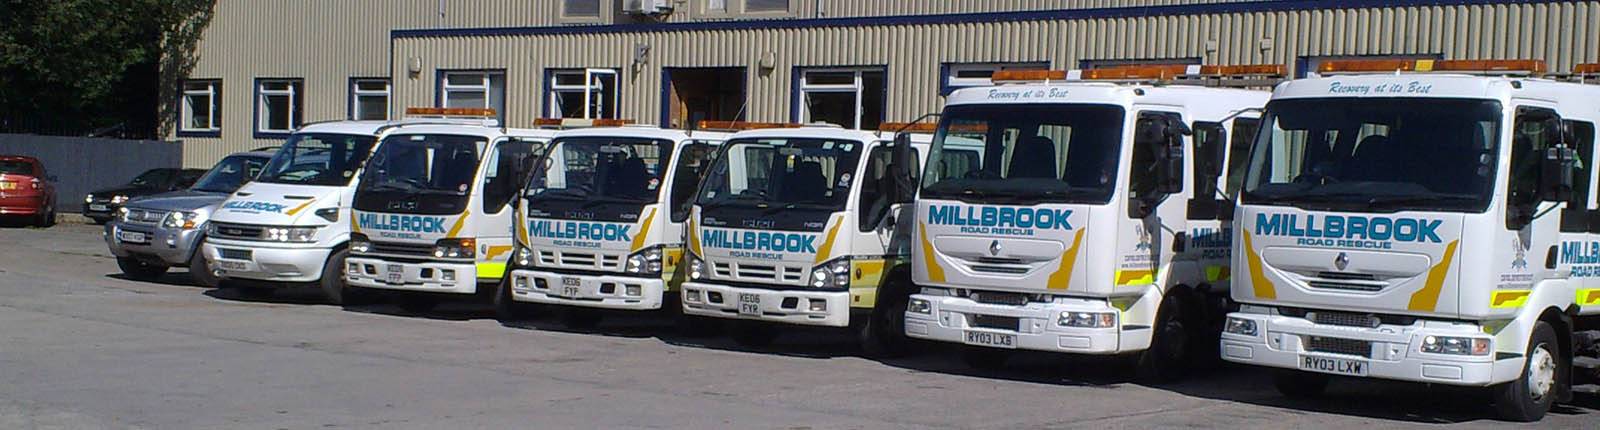 Rank of Millbrook recovery Trucks and Vans